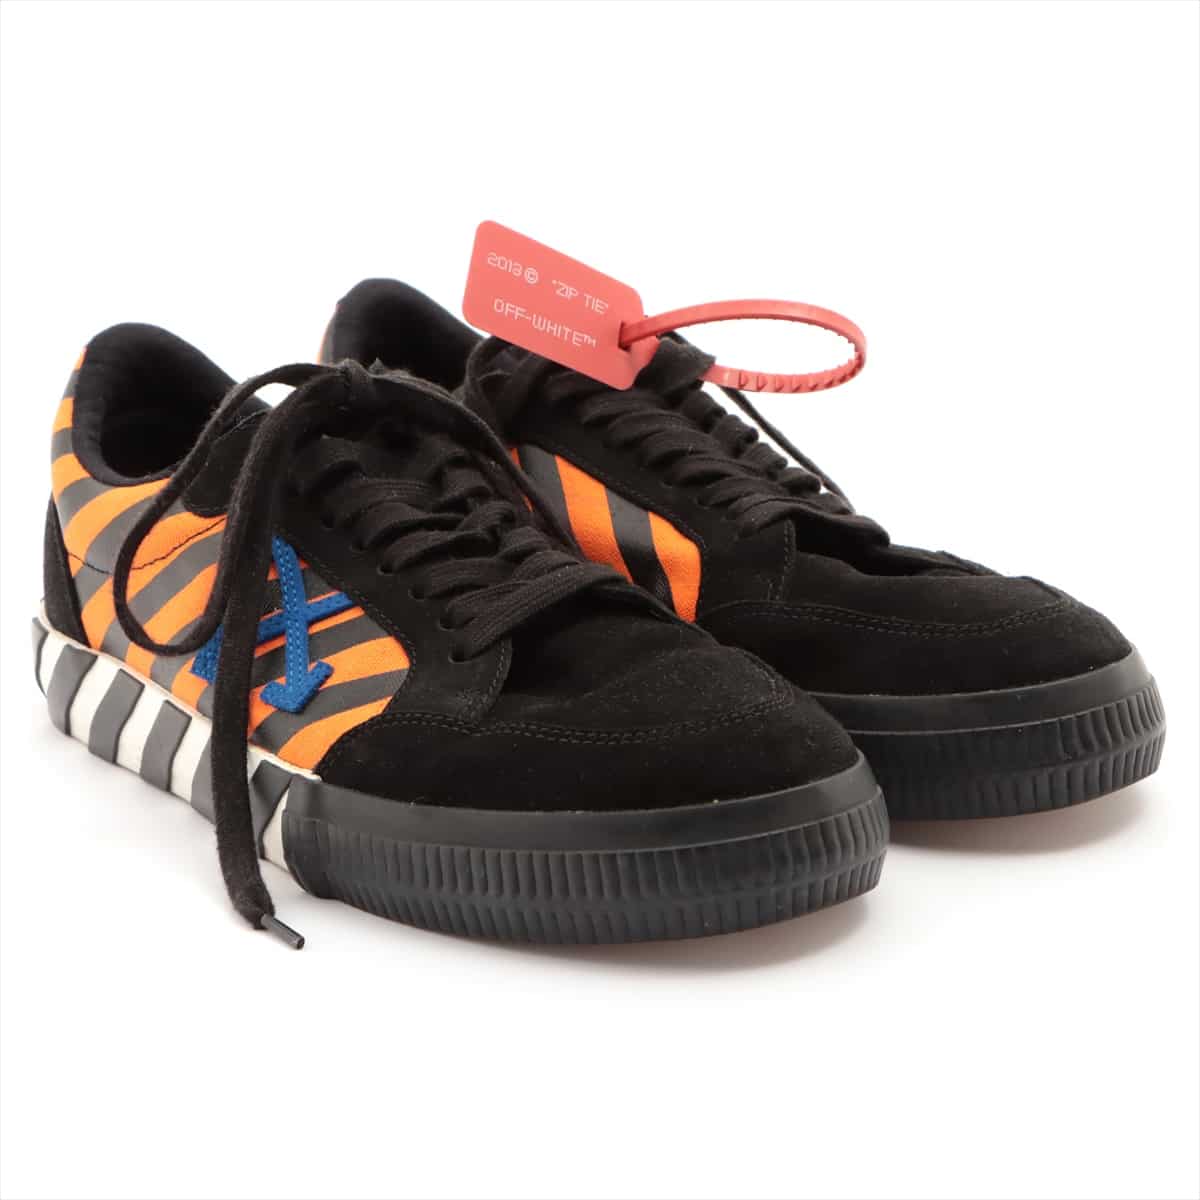 Off-White Suede x canvas Sneakers 43 Men's Black